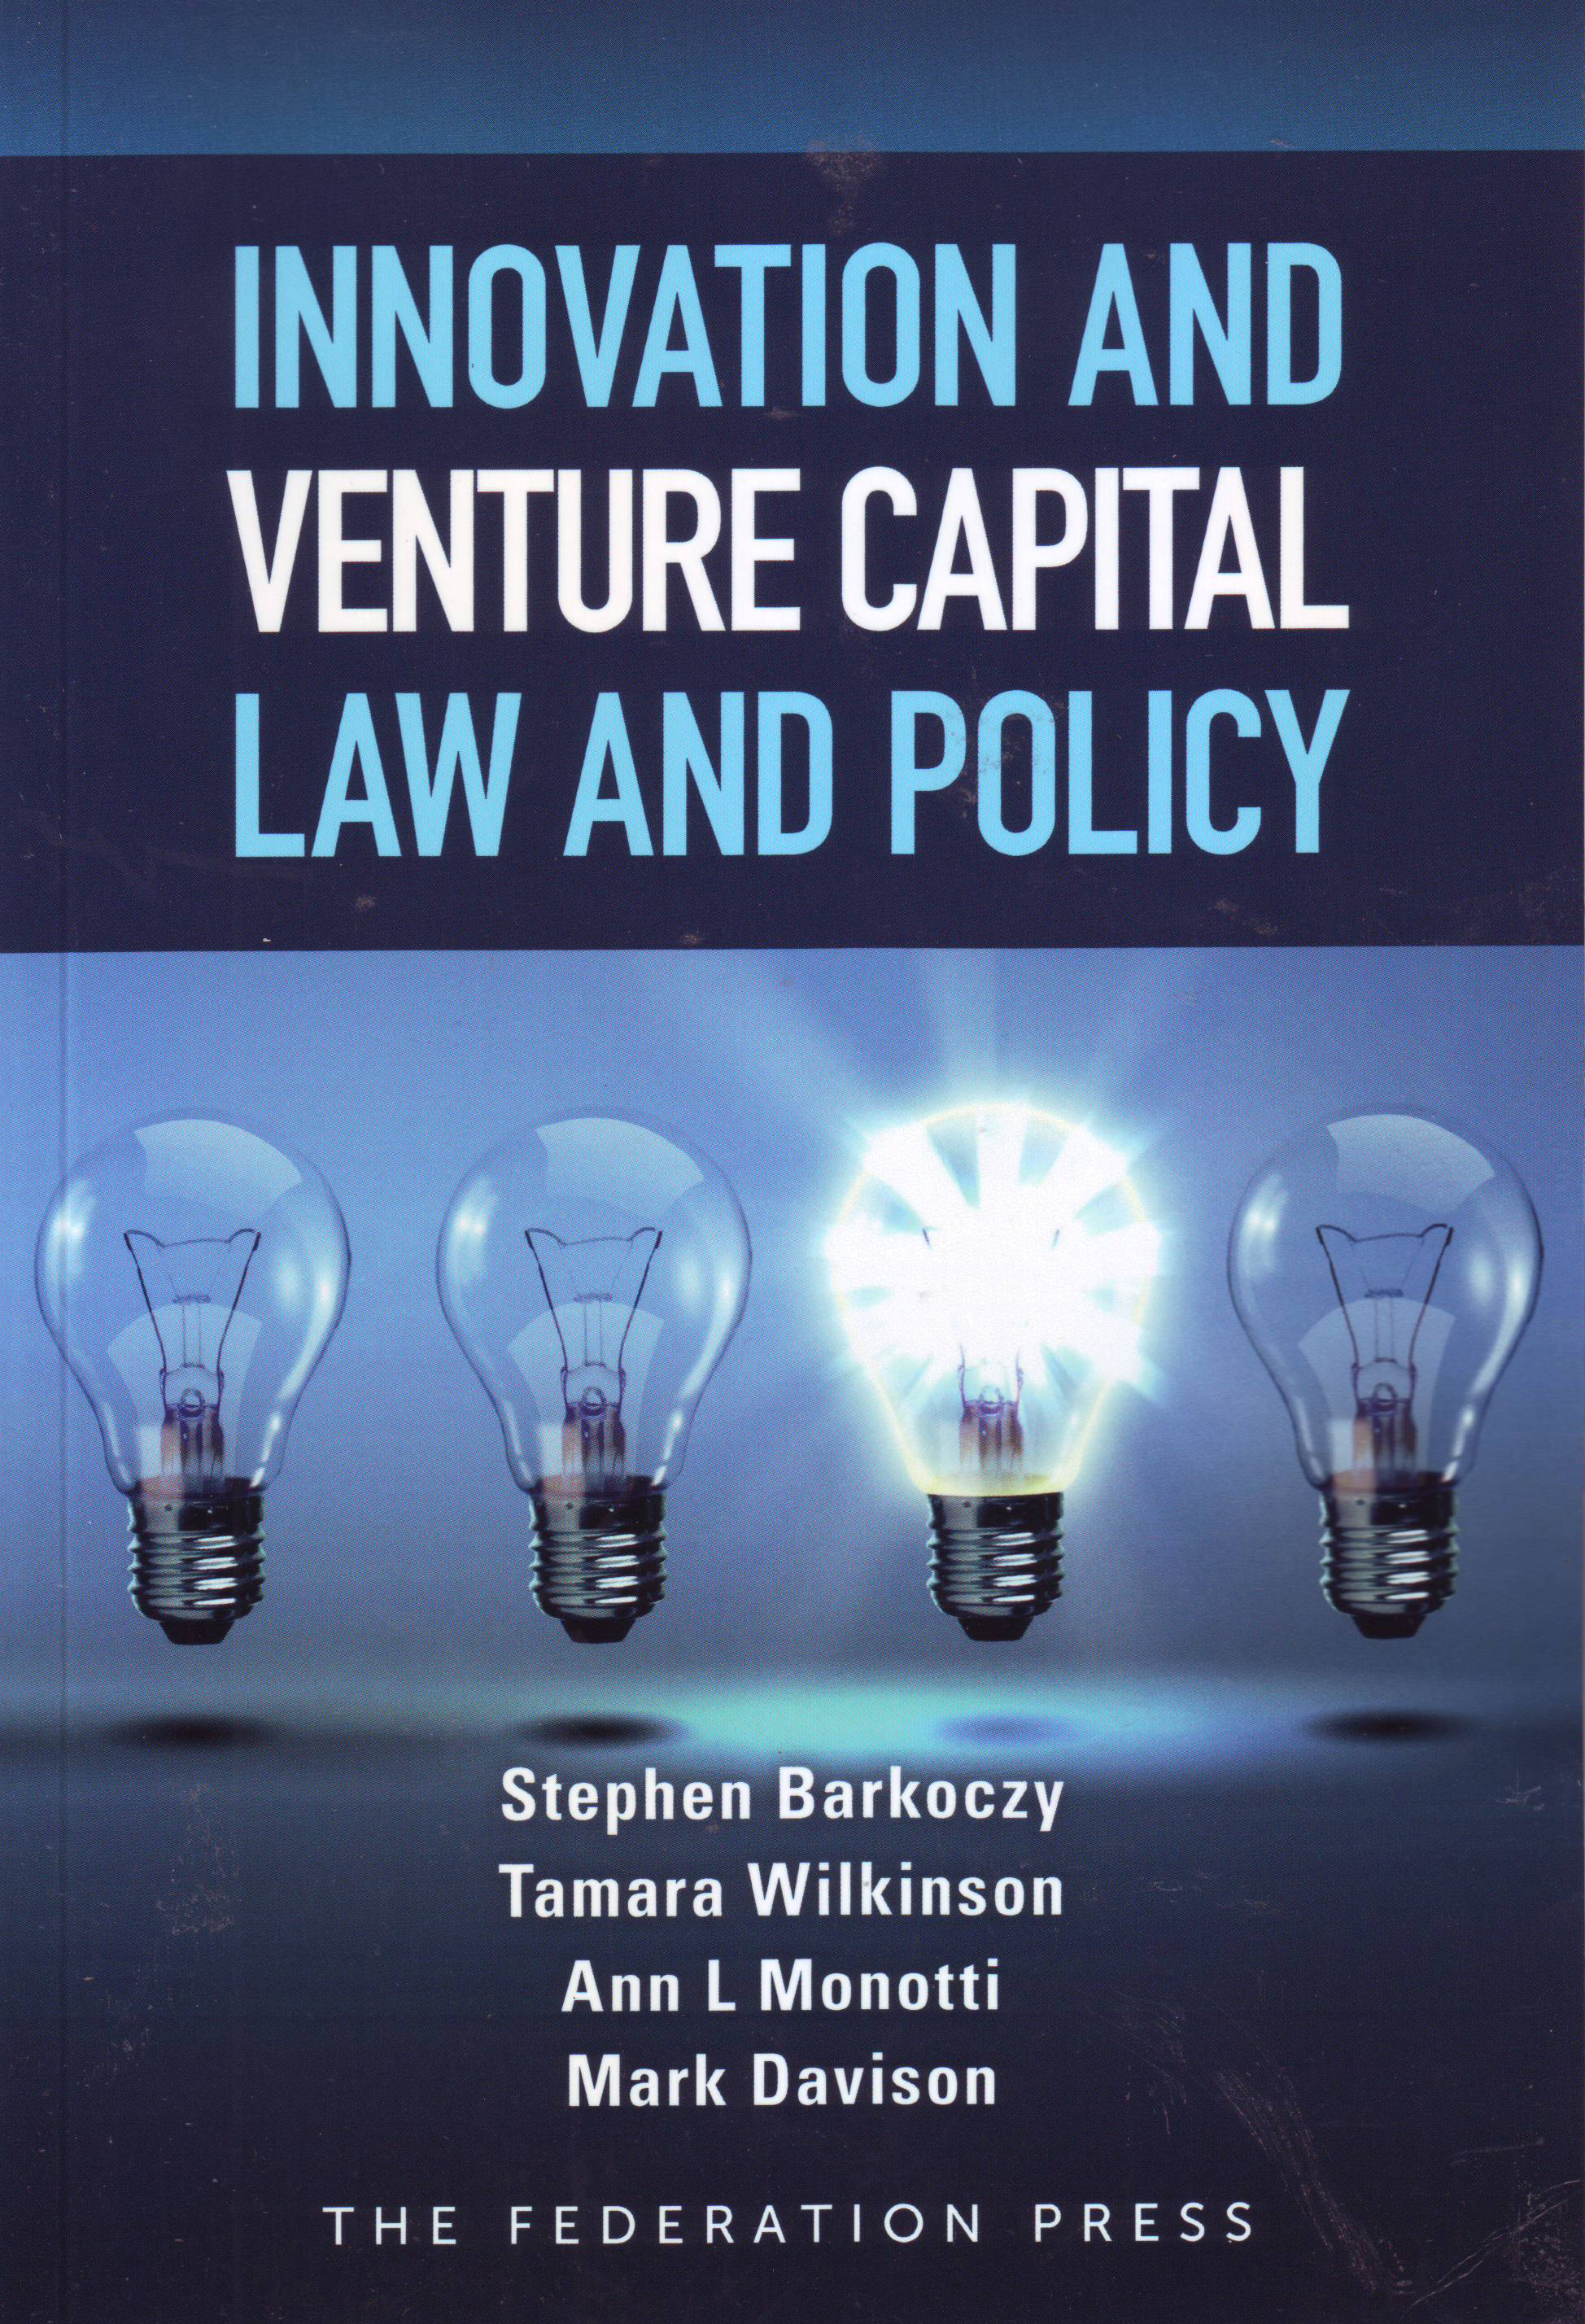 Innovation and Venture Capital Law and Policy